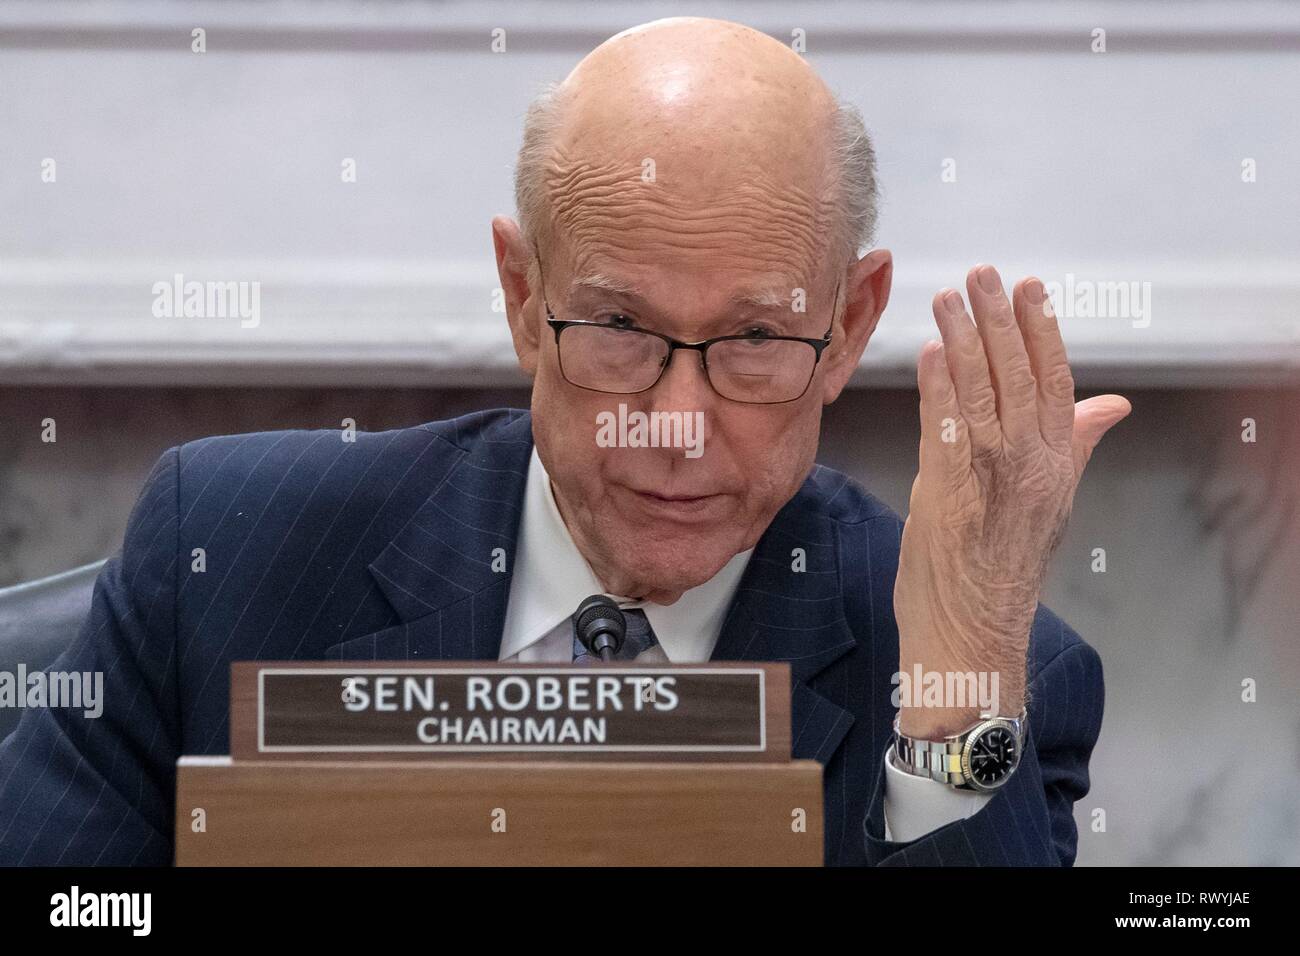 U.S. Senator Pat Roberts of Kansas, questions Agriculture Secretary Sonny Perdue during a hearing at the Senate Agriculture, Nutrition, and Forestry committee hearing on implementing the Agriculture Improvement Act of 2018 on Capitol Hill February 28, 2019 in Washington, D.C. Stock Photo